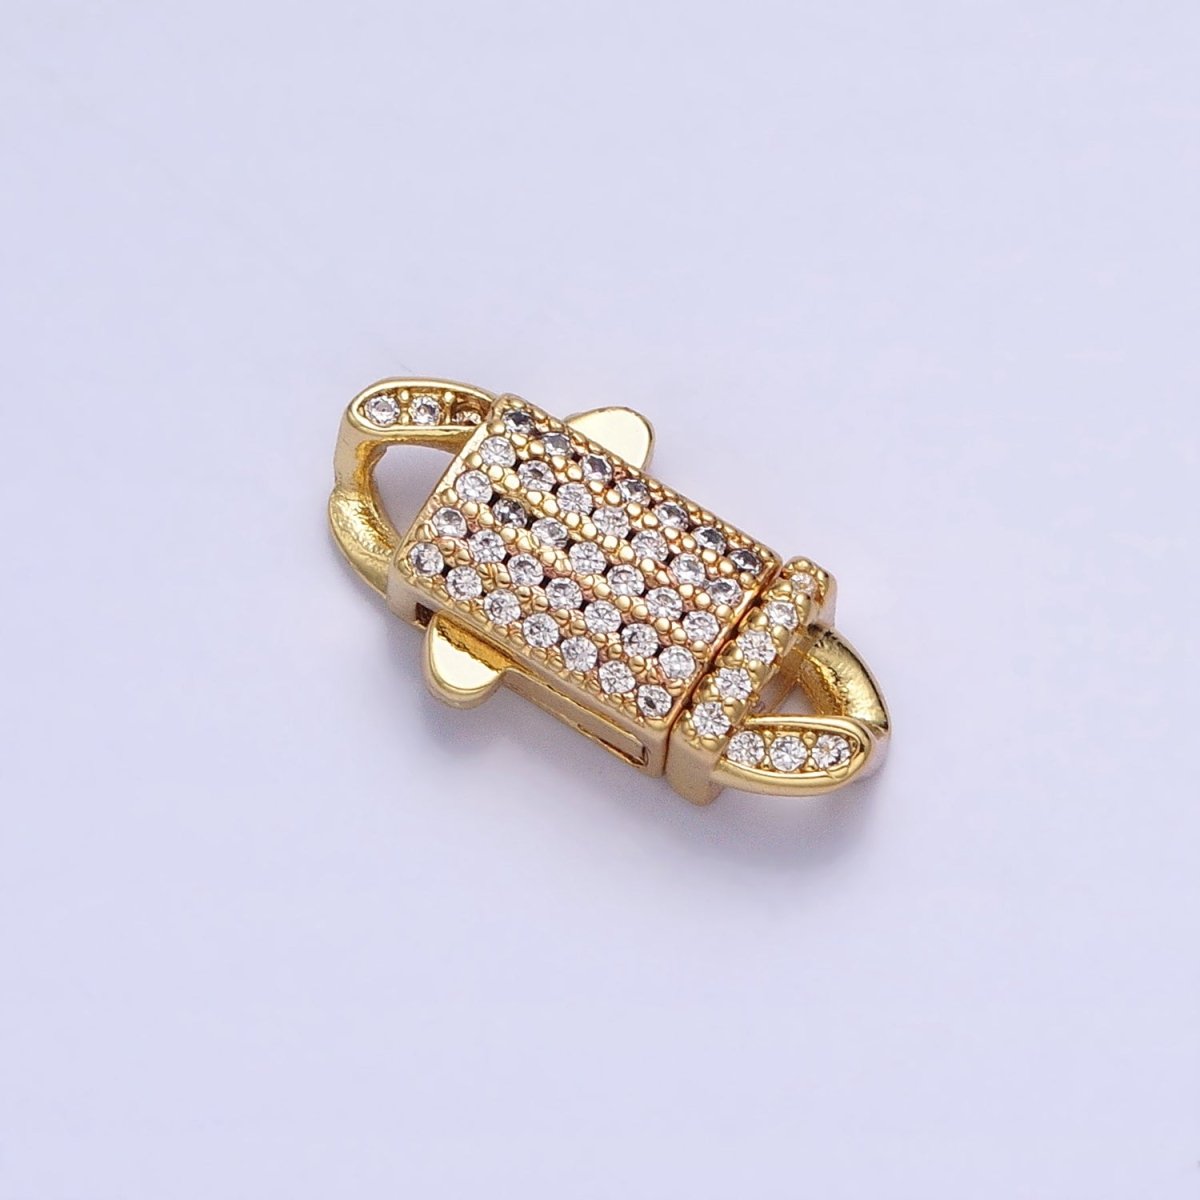 Gold Plated 16.7mm Long Cubic Zirconia Trigger Clasps for Bracelet Necklace End Clasp Jewelry Making Supply Z-175 - DLUXCA